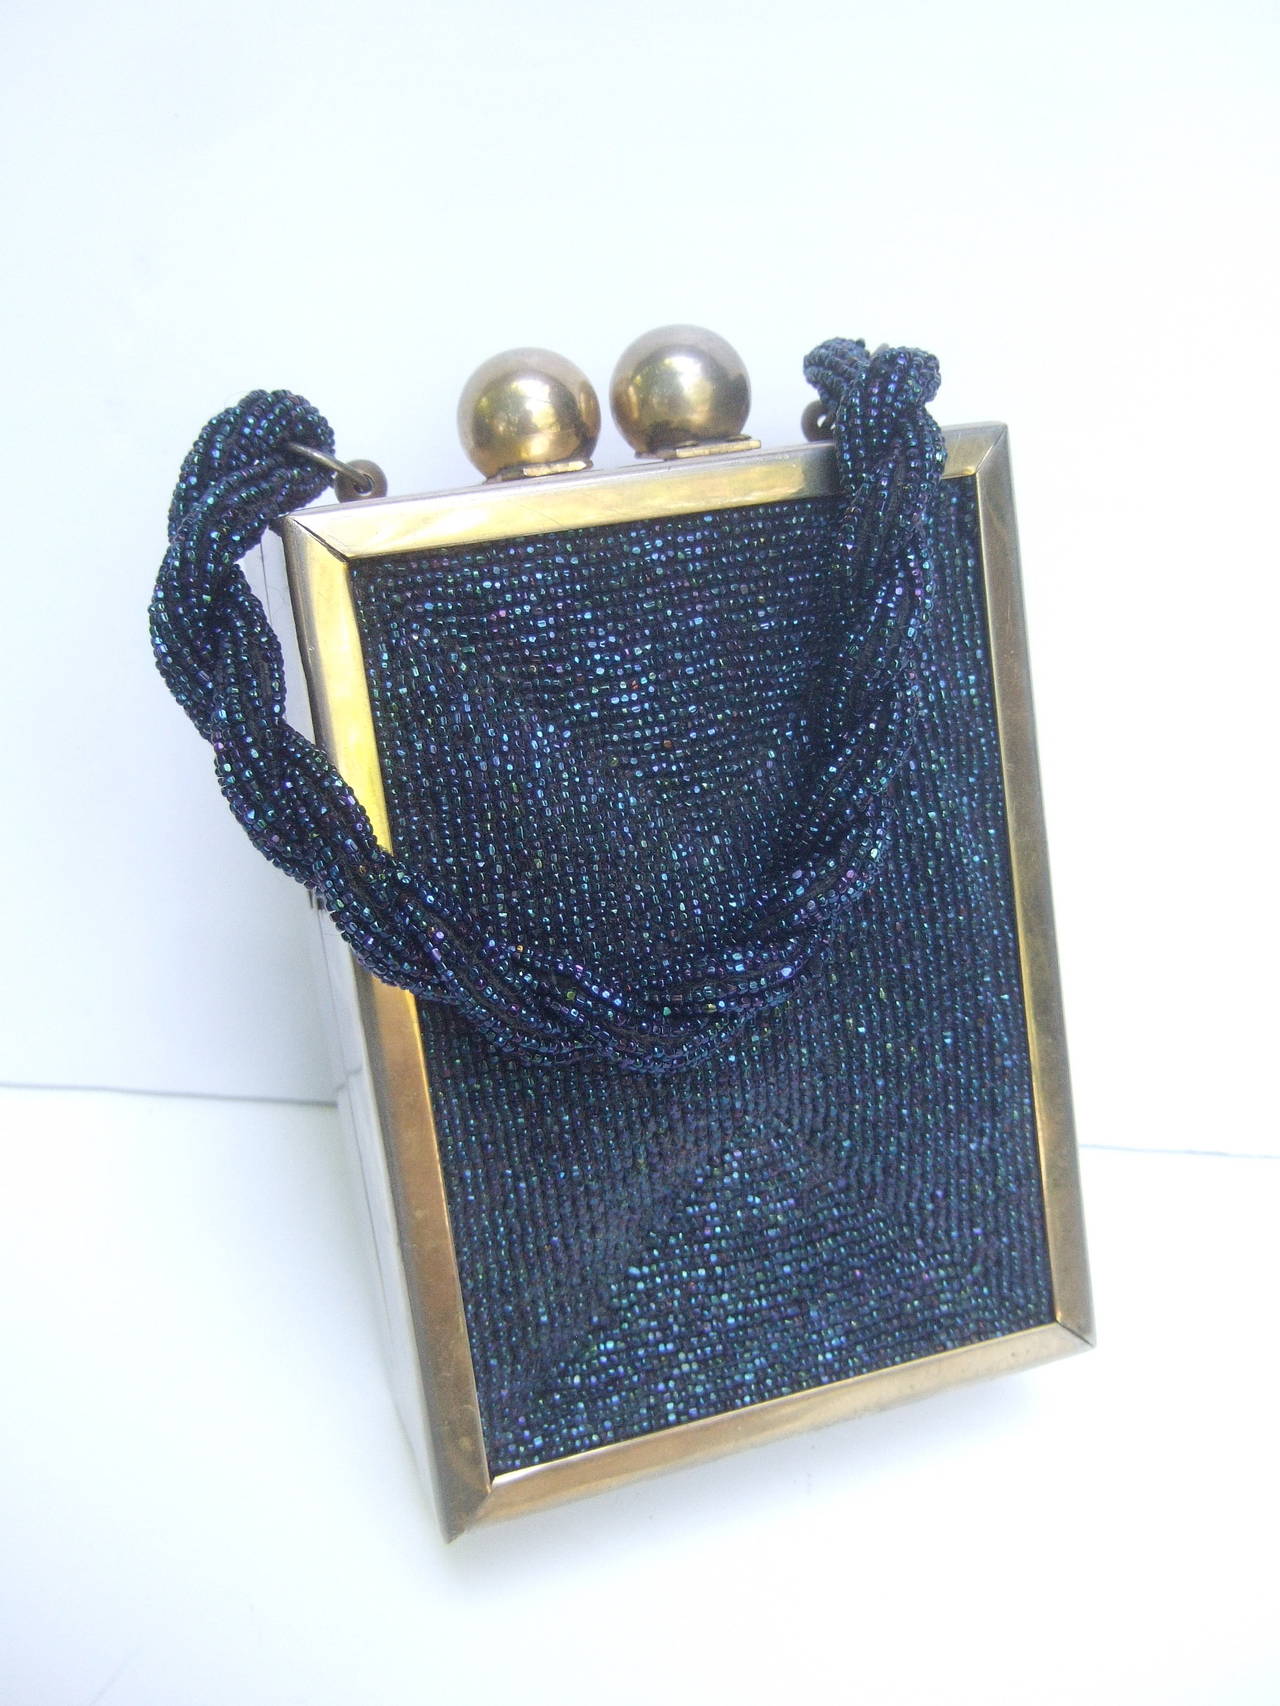 1940s Art Deco cobalt carnival glass beaded handbag
The sleek retro handbag is encrusted with glittering 
iridescent blue glass micro beads on both exterior
panels. The extravagant glass beaded panels are
designed in a subtle geometric raised